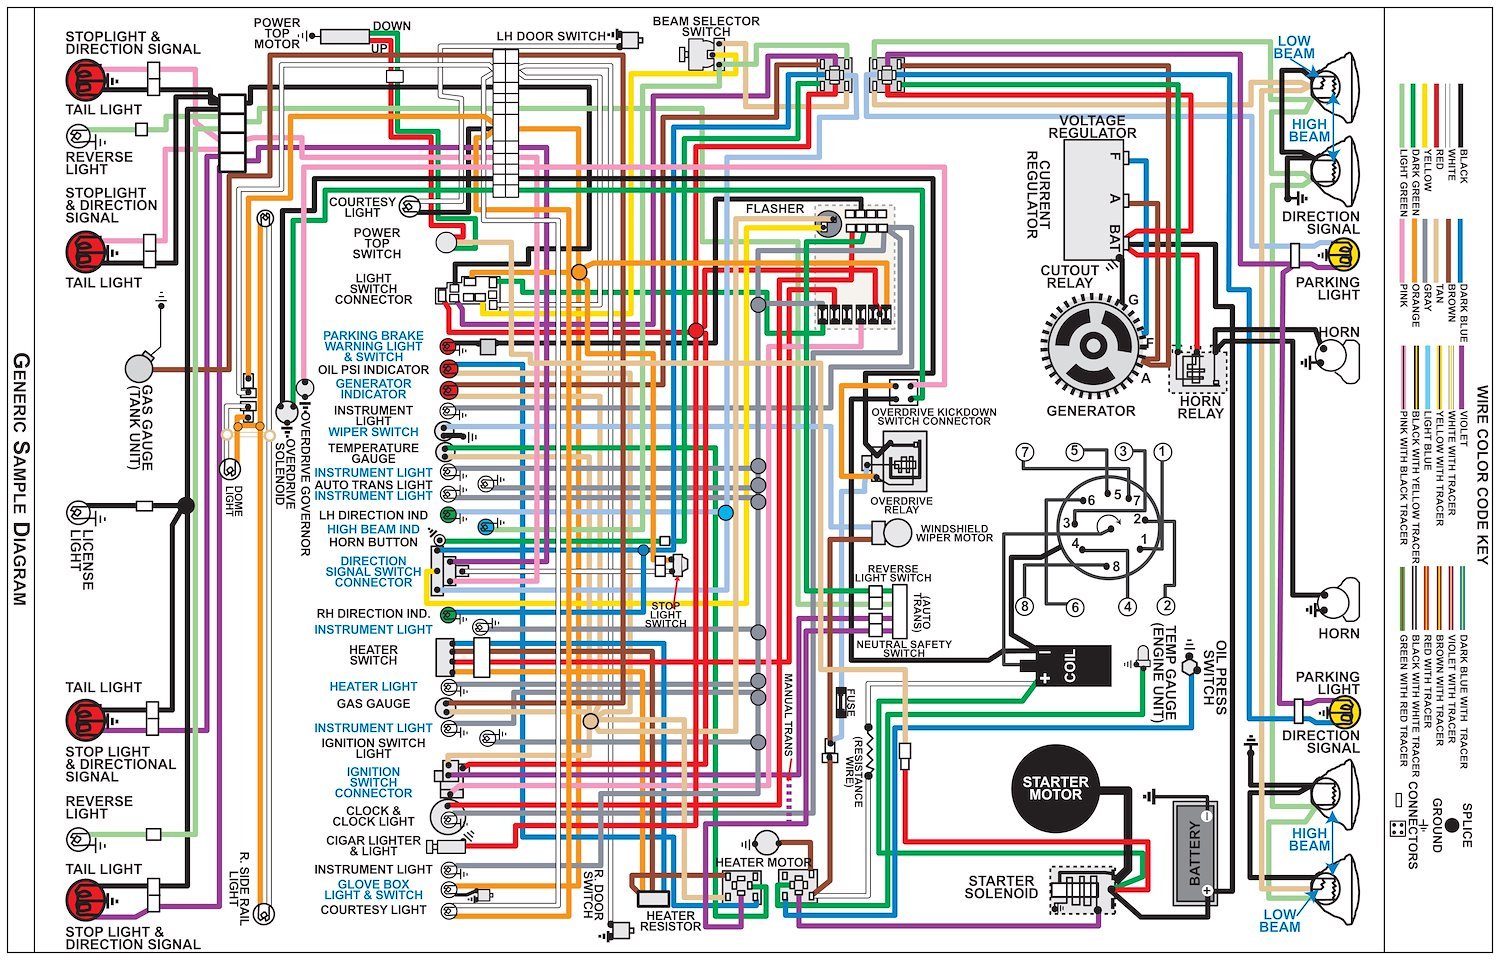 Wiring Diagram for 1938 Cadillac V8 Series 38-60,